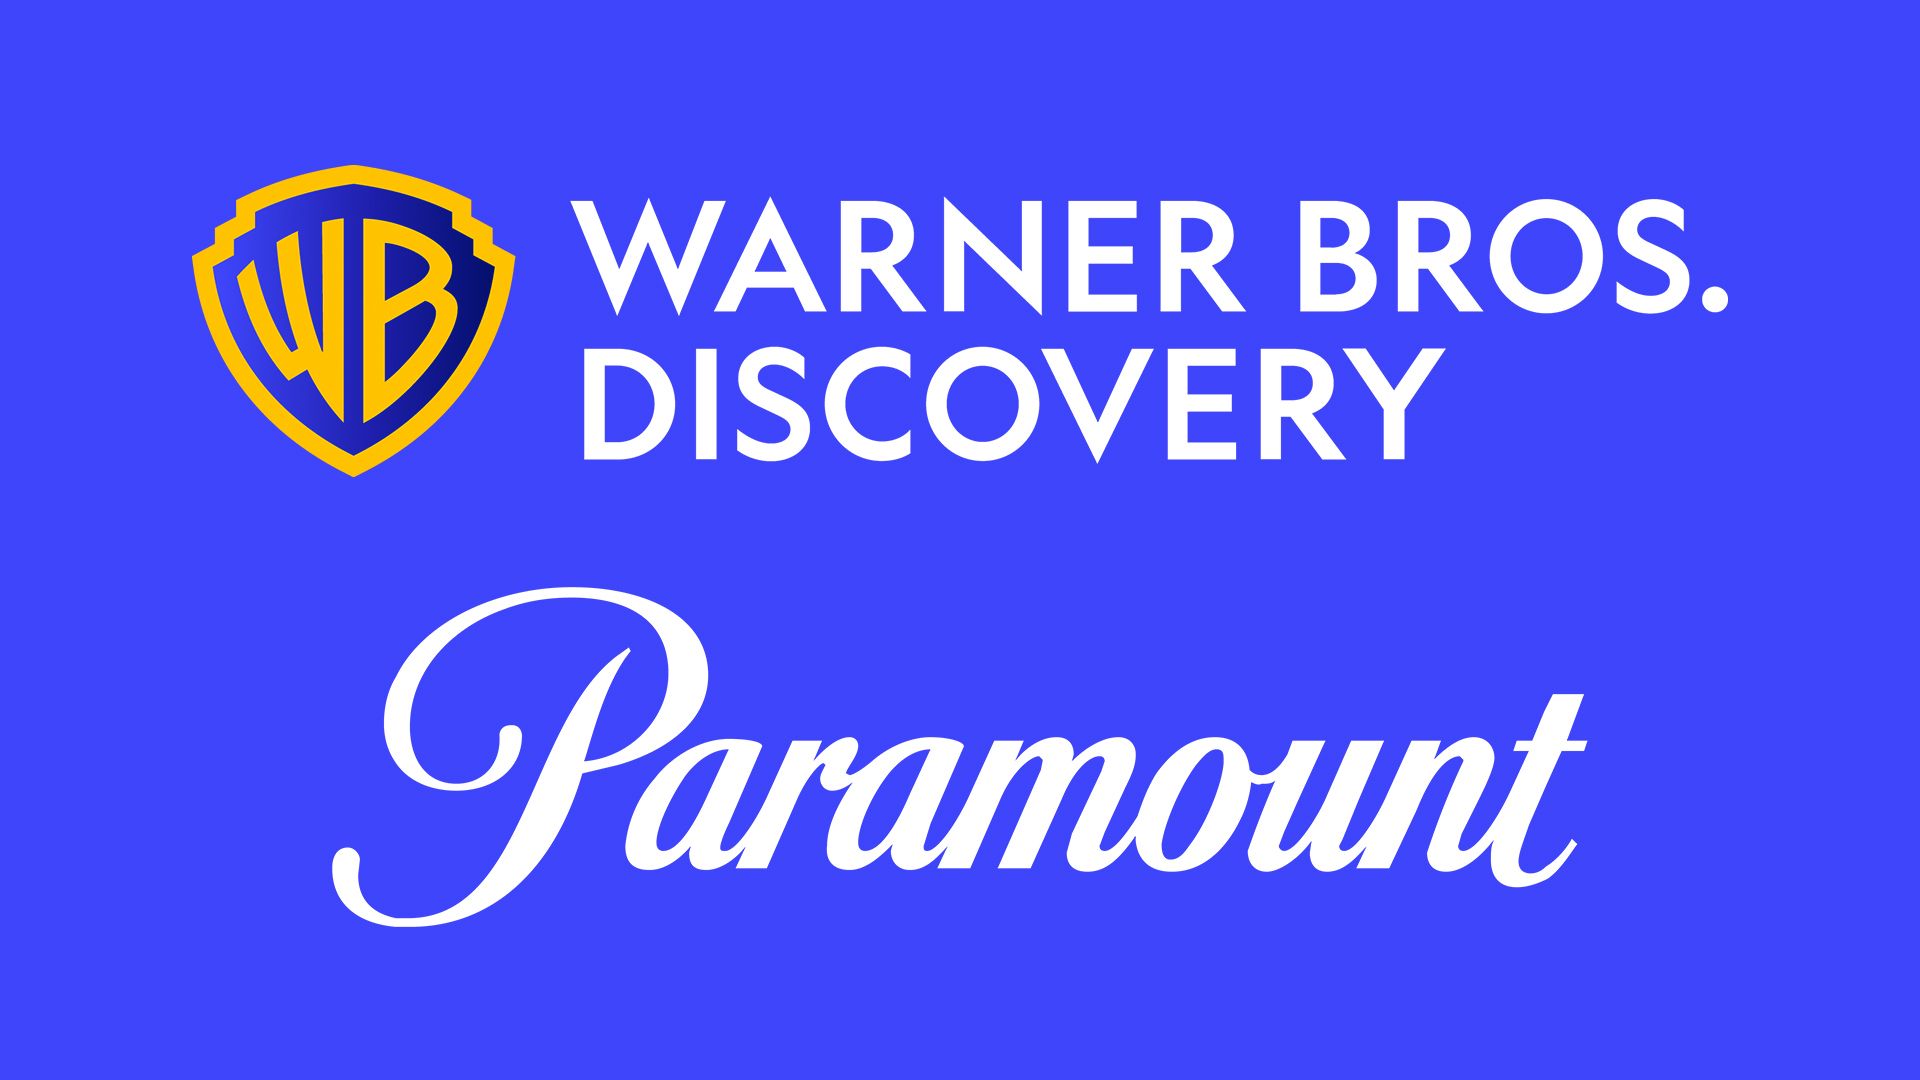 Warner Bros. Discovery and Paramount in merger talks: What's at